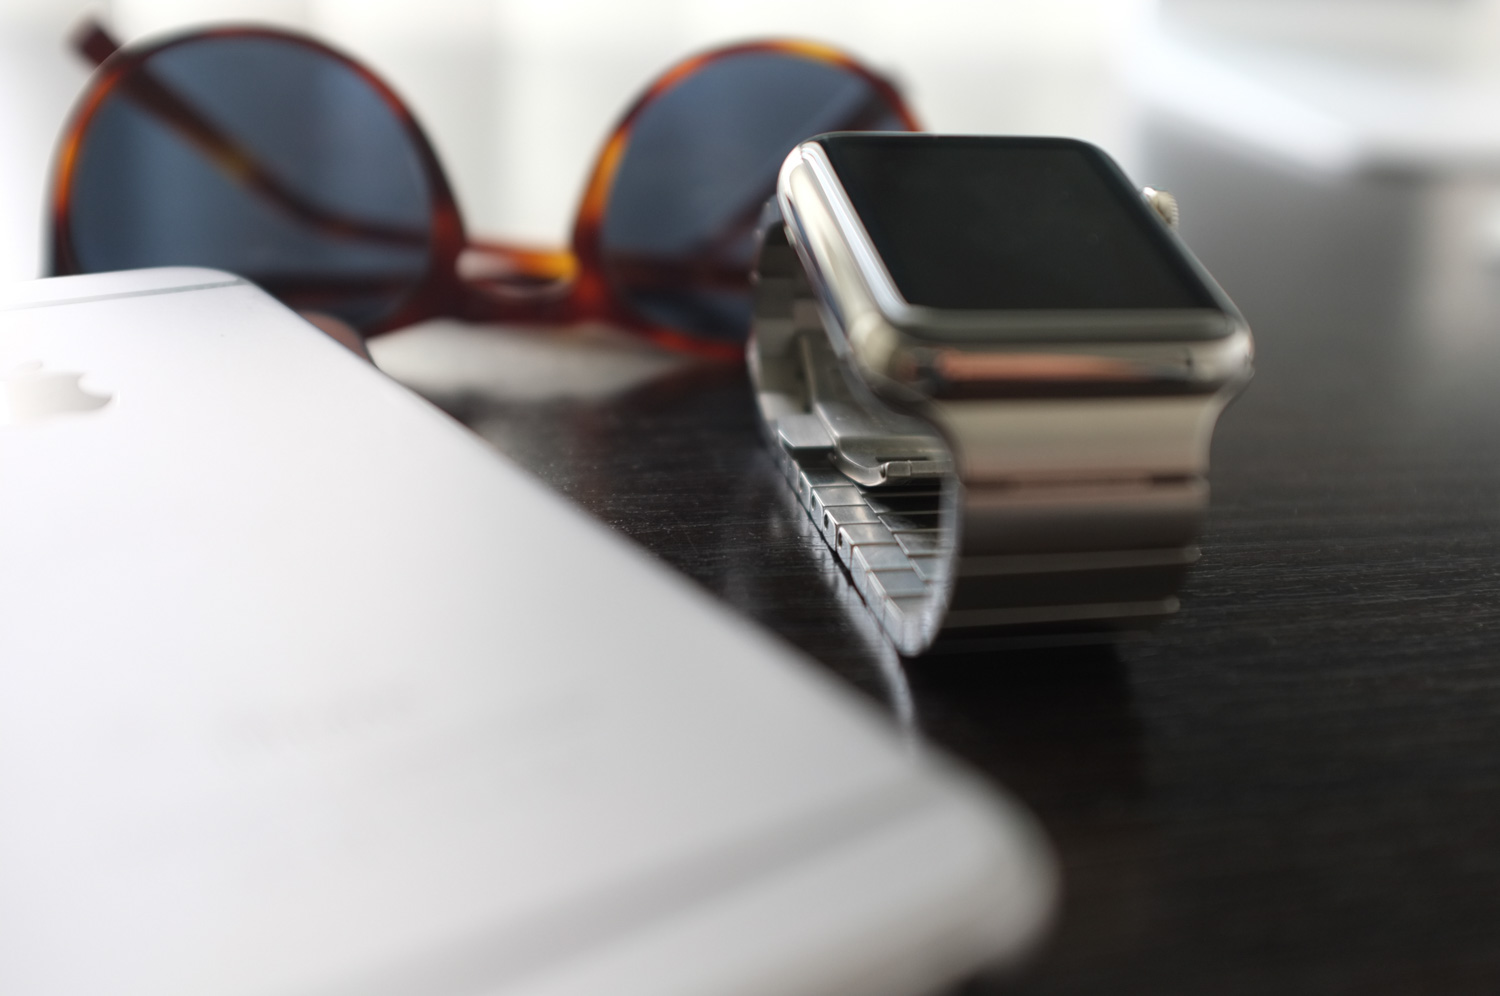 Apple Updating Apple Watch In March With New Bands, New Design In The Fall